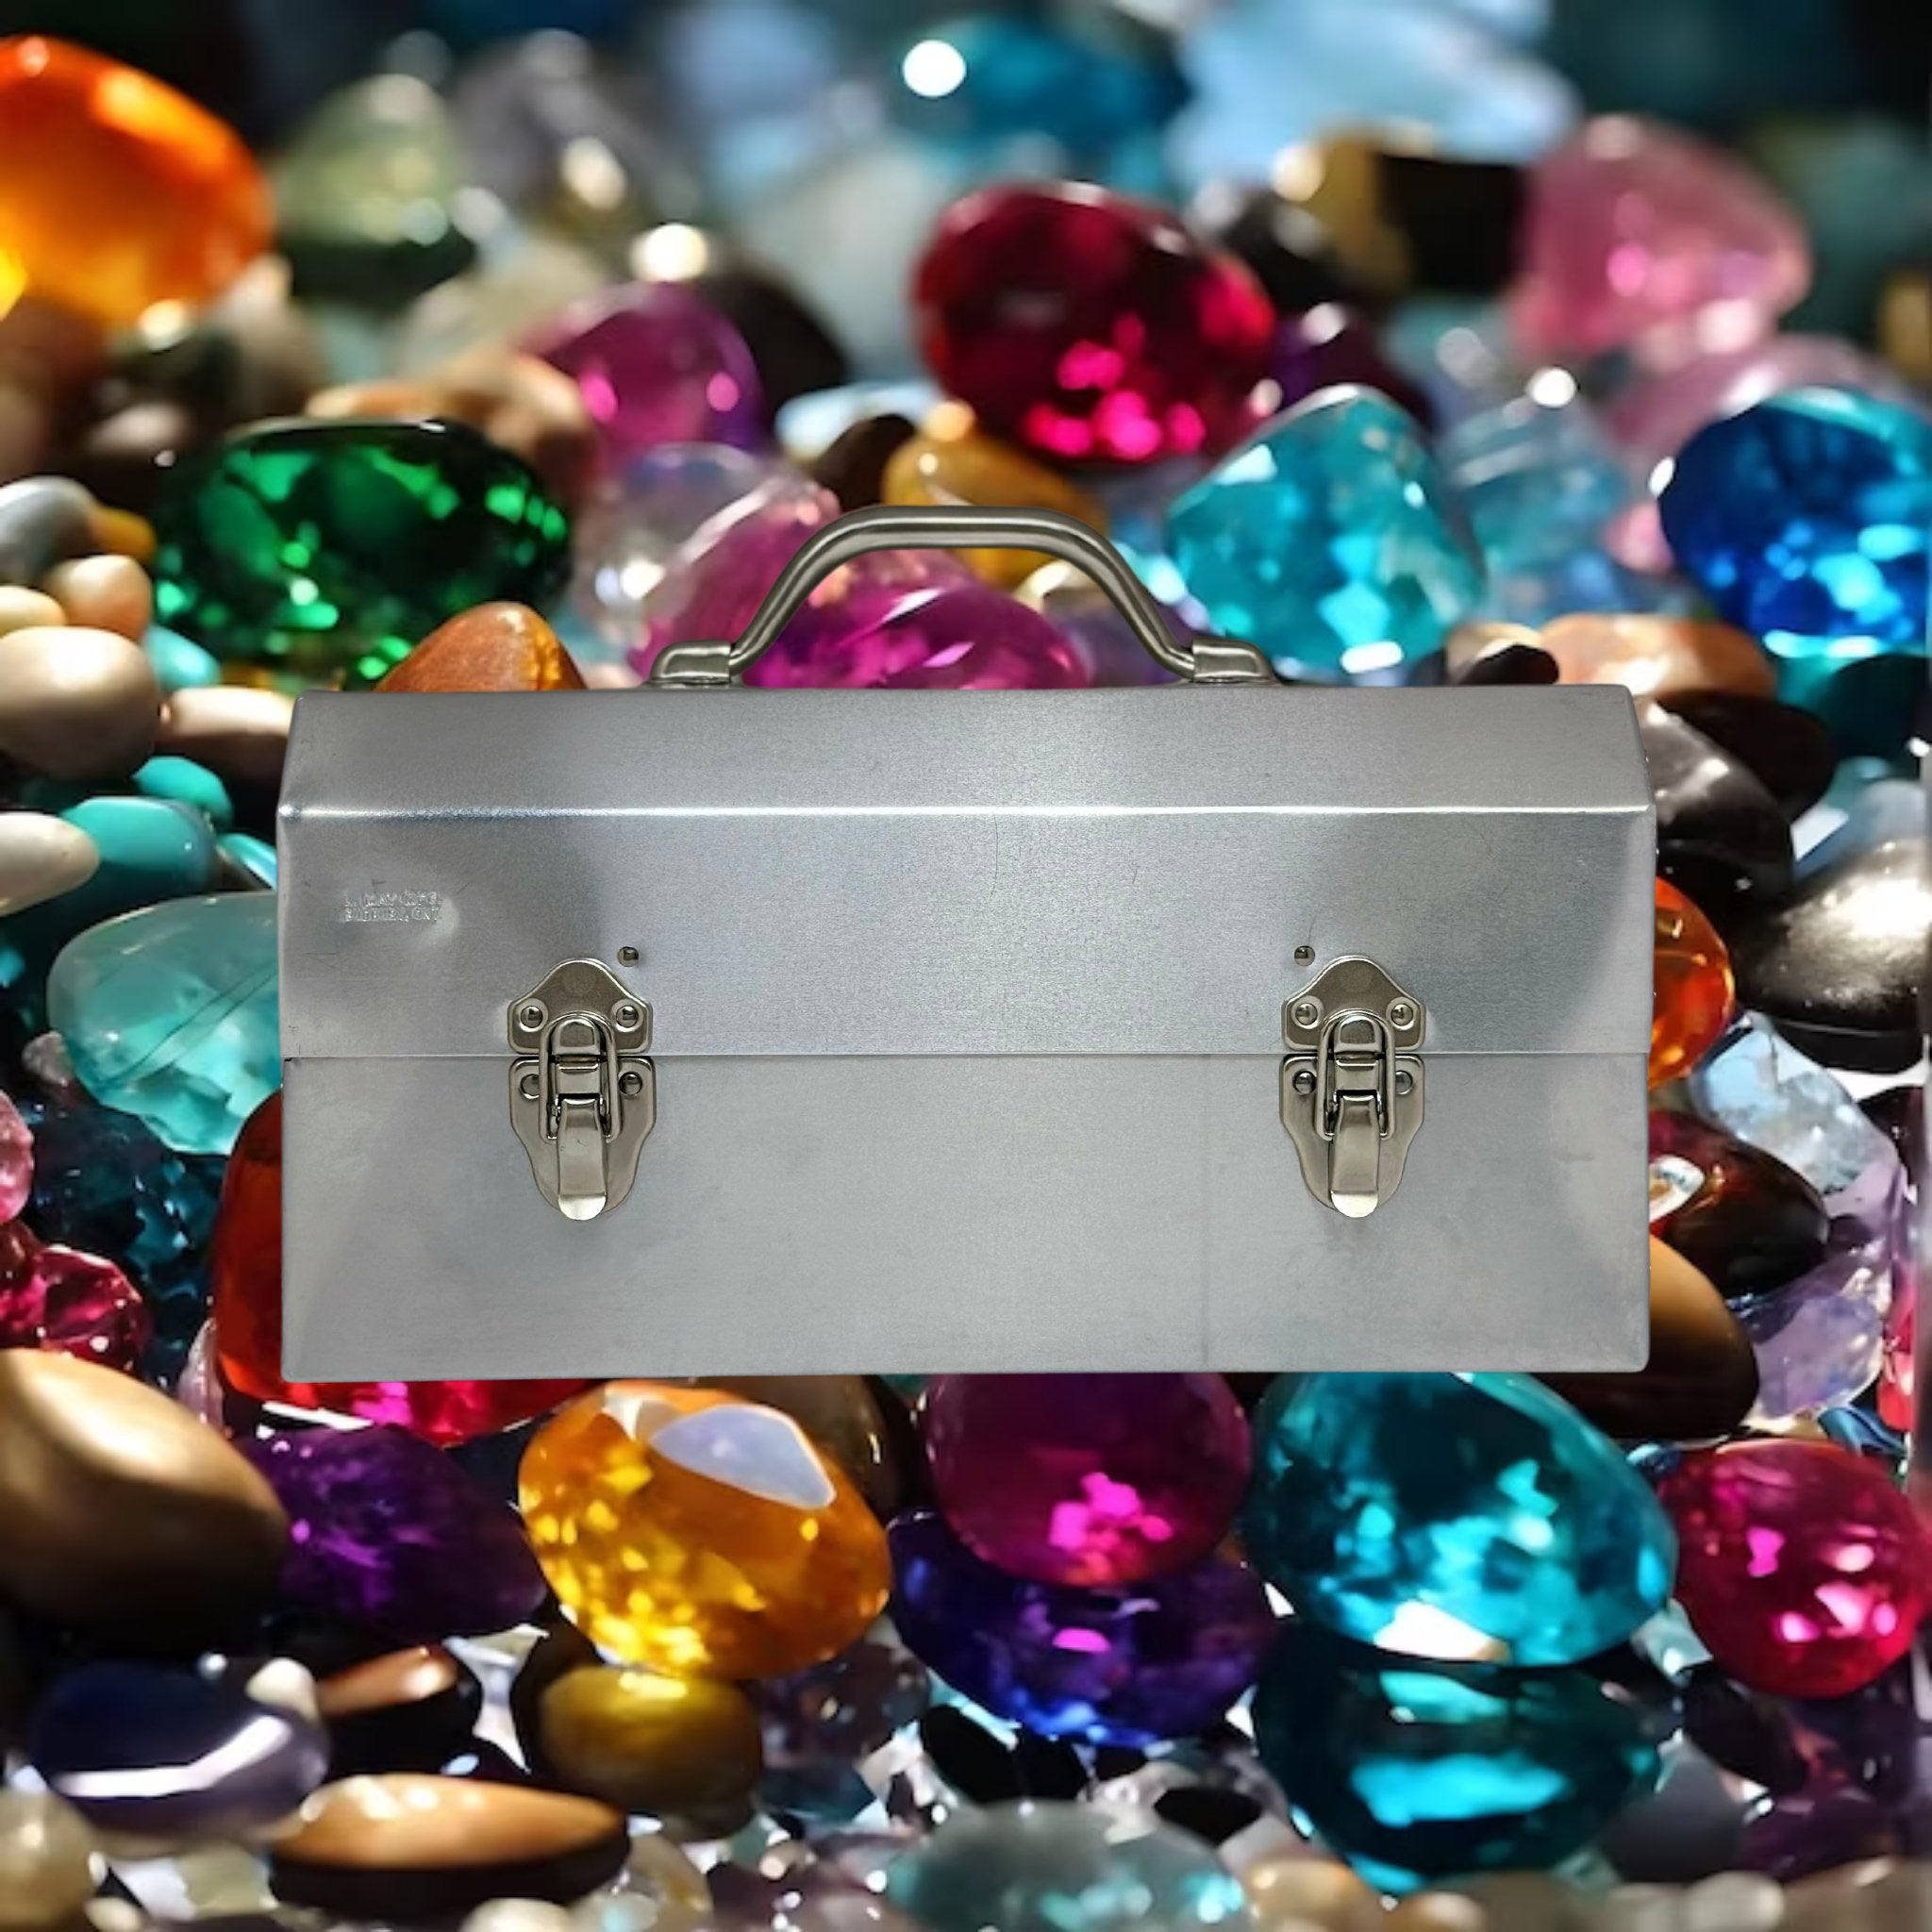 How Are Gemstones Related To L. May? - The Miners Lunchbox